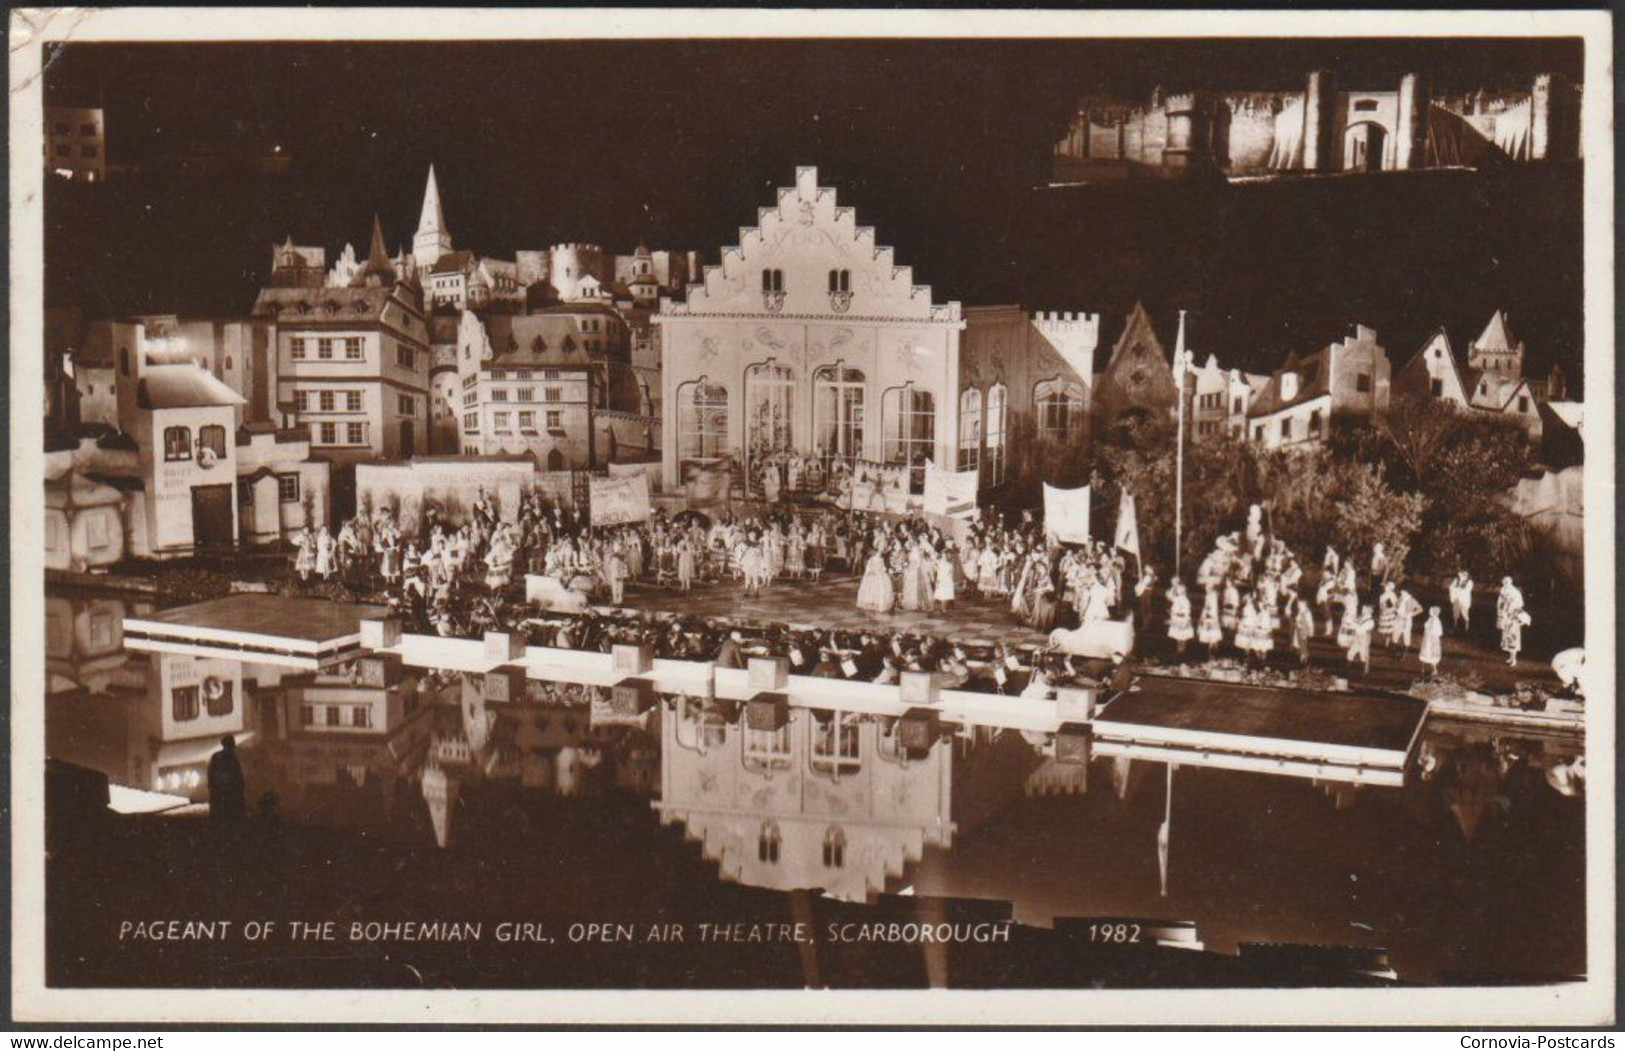 Pageant Of The Bohemian Girl, Open Air Theatre, Scarborough, 1939 - RP Postcard - Scarborough